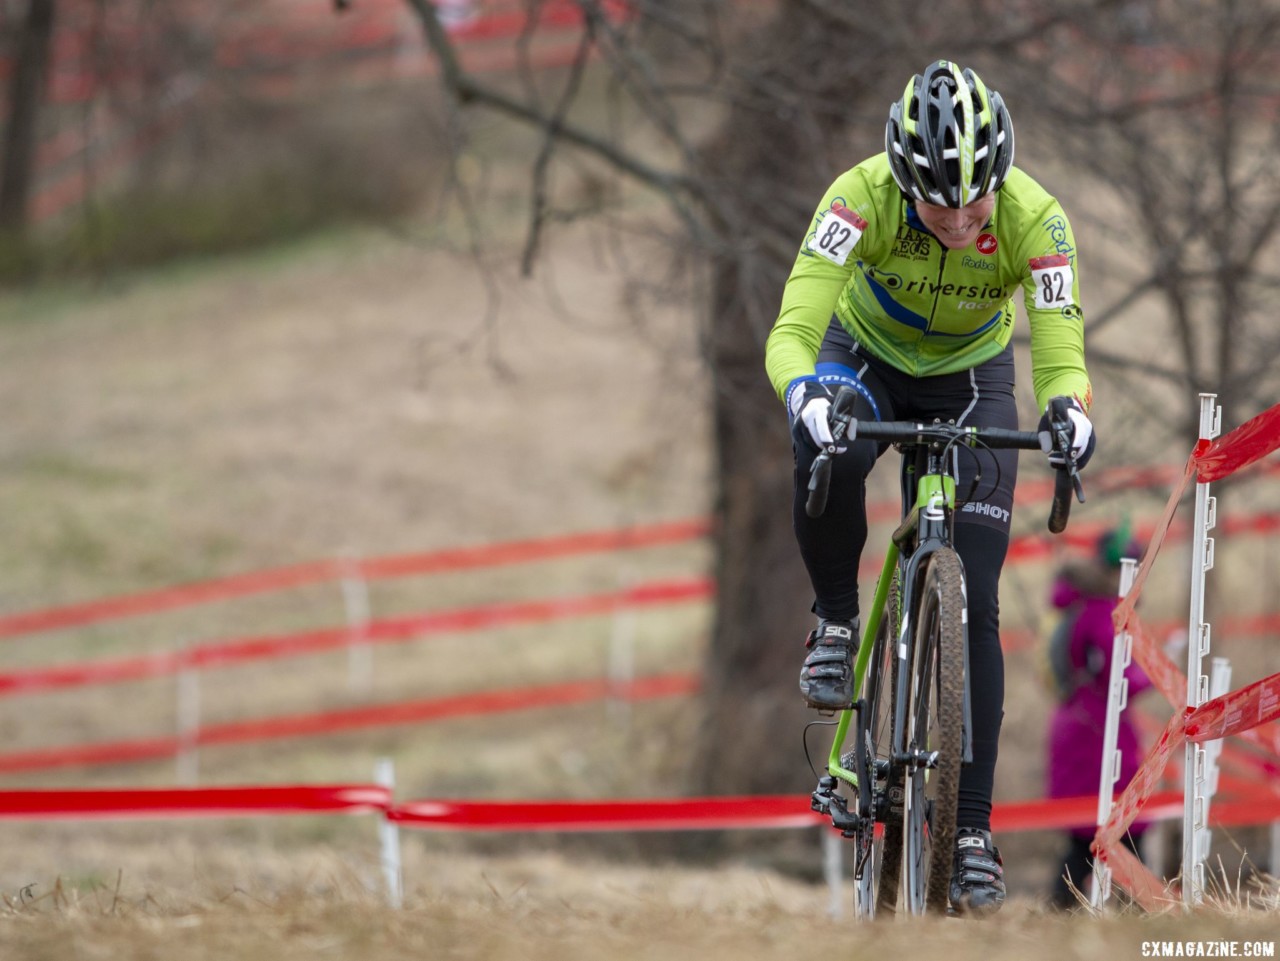 Like Barbossa, silver medalist Andrea Cox rode most of the race alone. Masters Women 50-54. 2018 Cyclocross National Championships, Louisville, KY. © A. Yee / Cyclocross Magazine